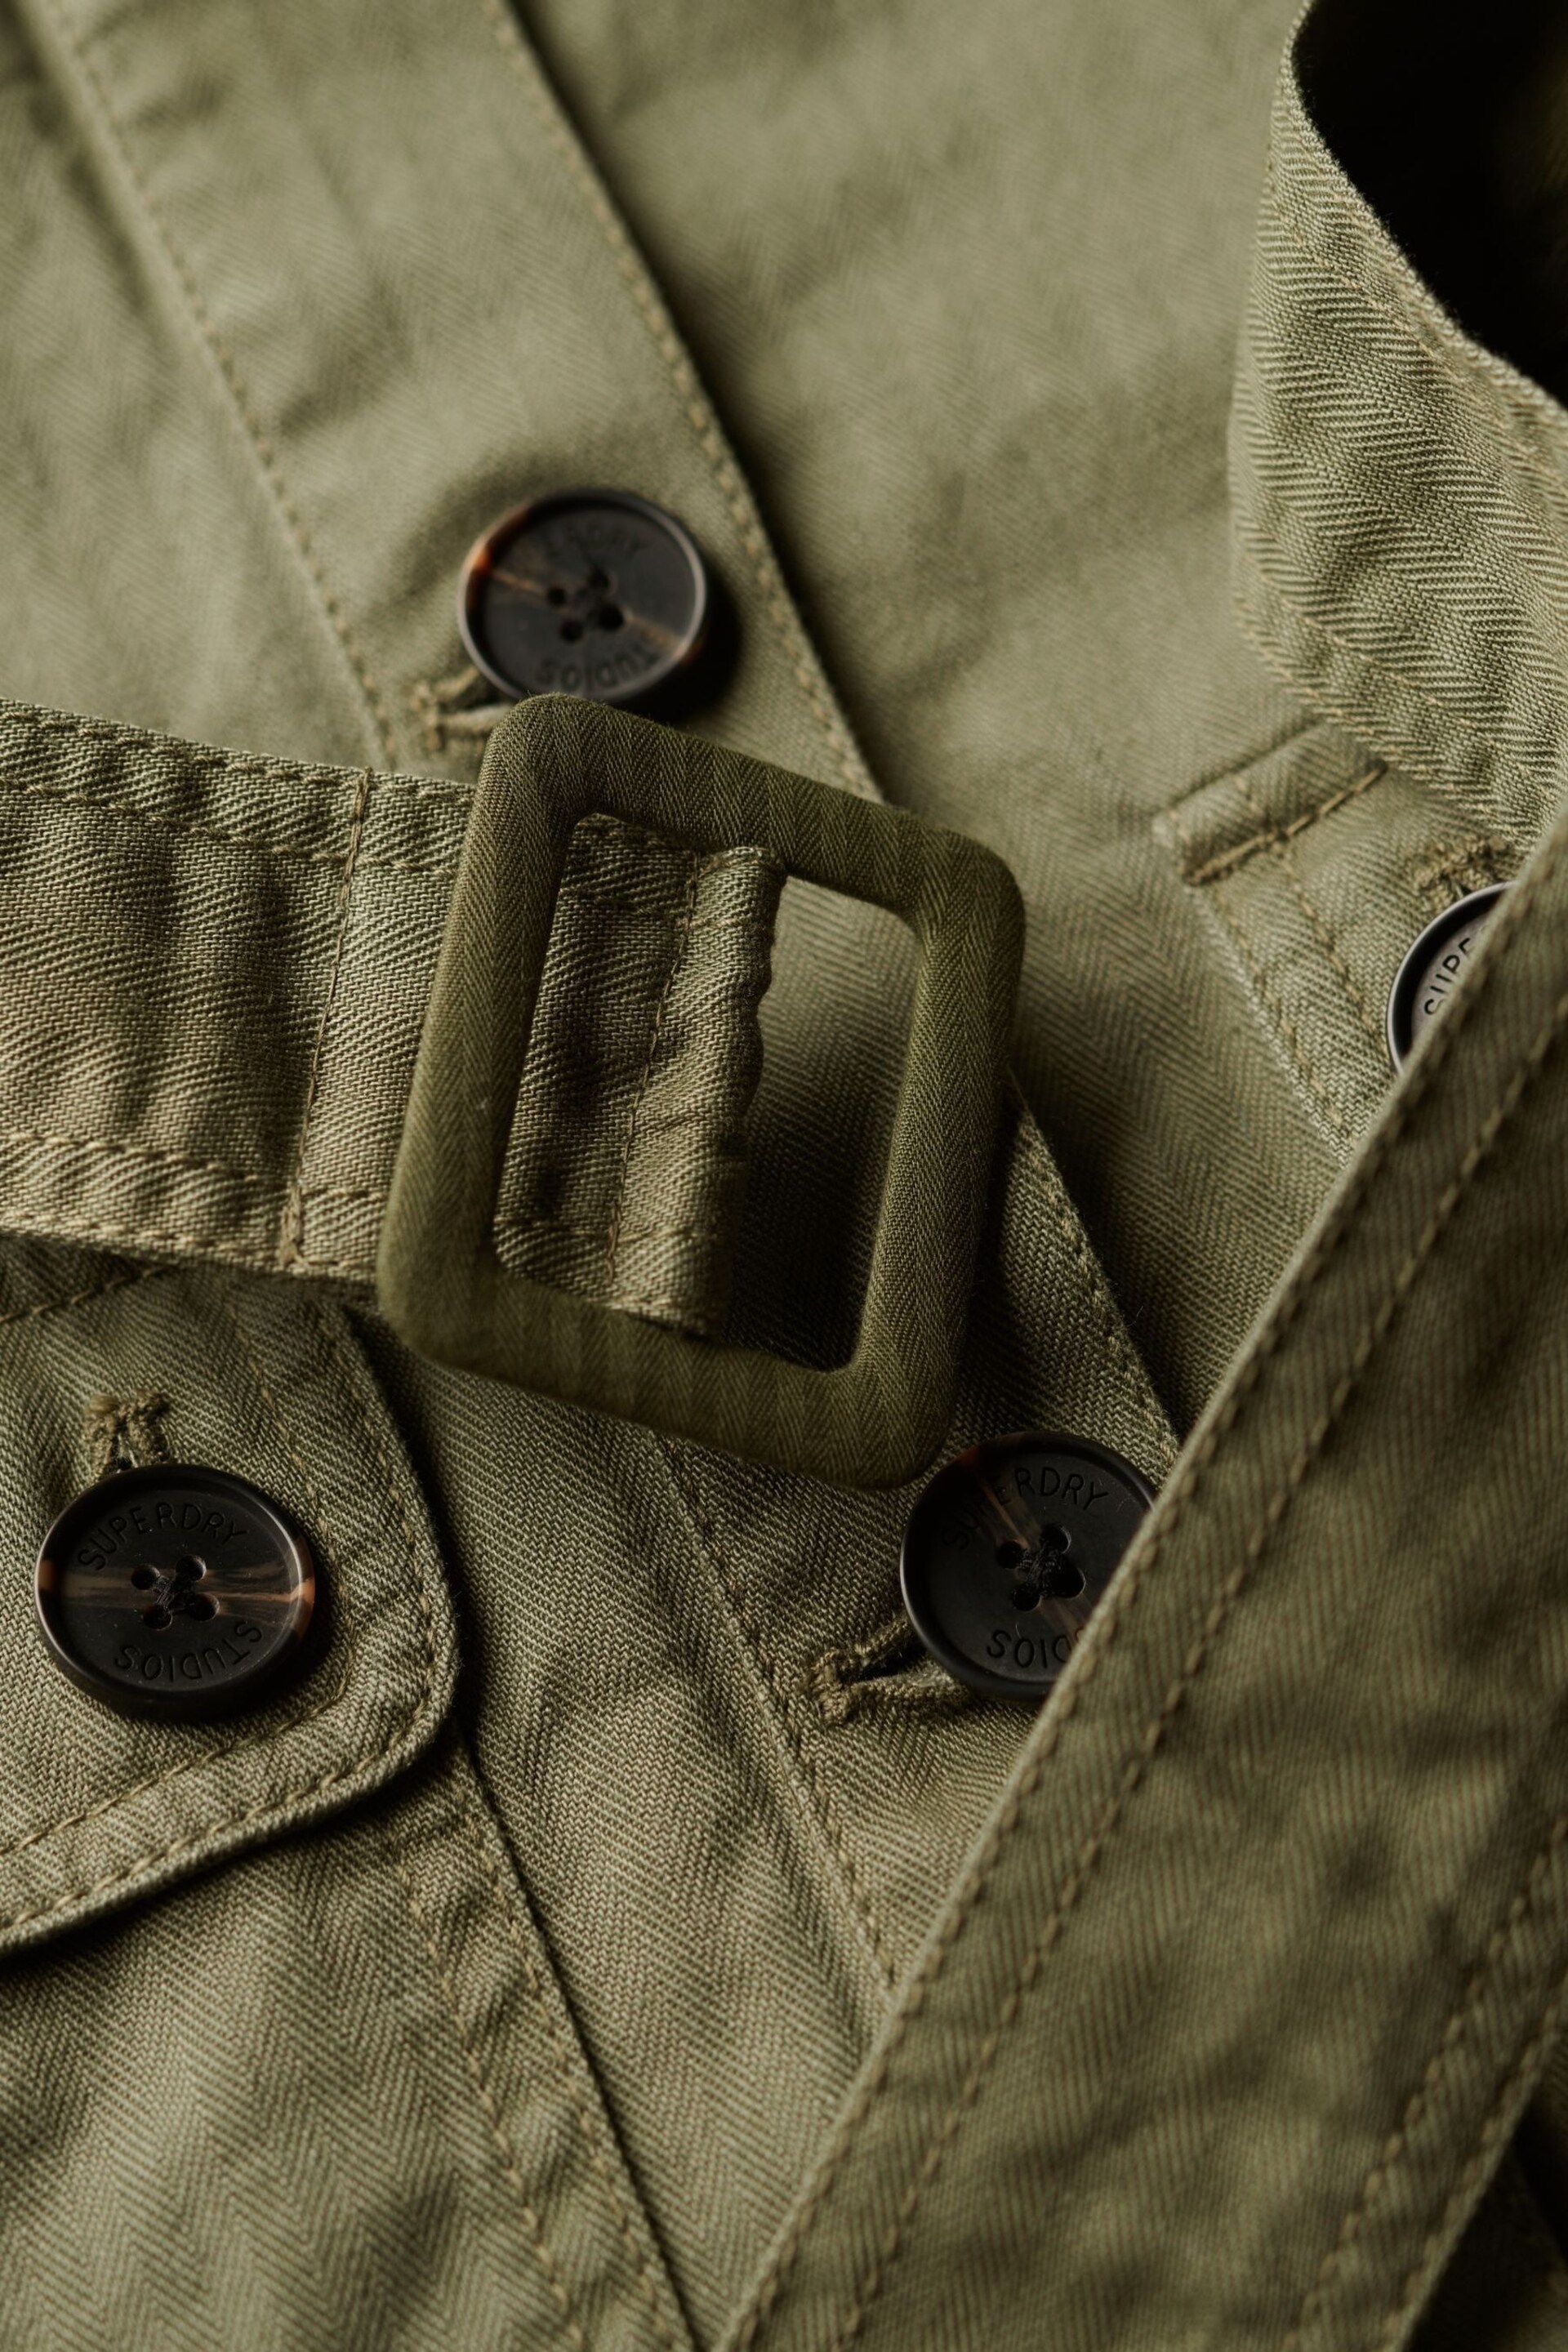 Superdry Green Cotton Belted Safari Utility Jacket - Image 5 of 6